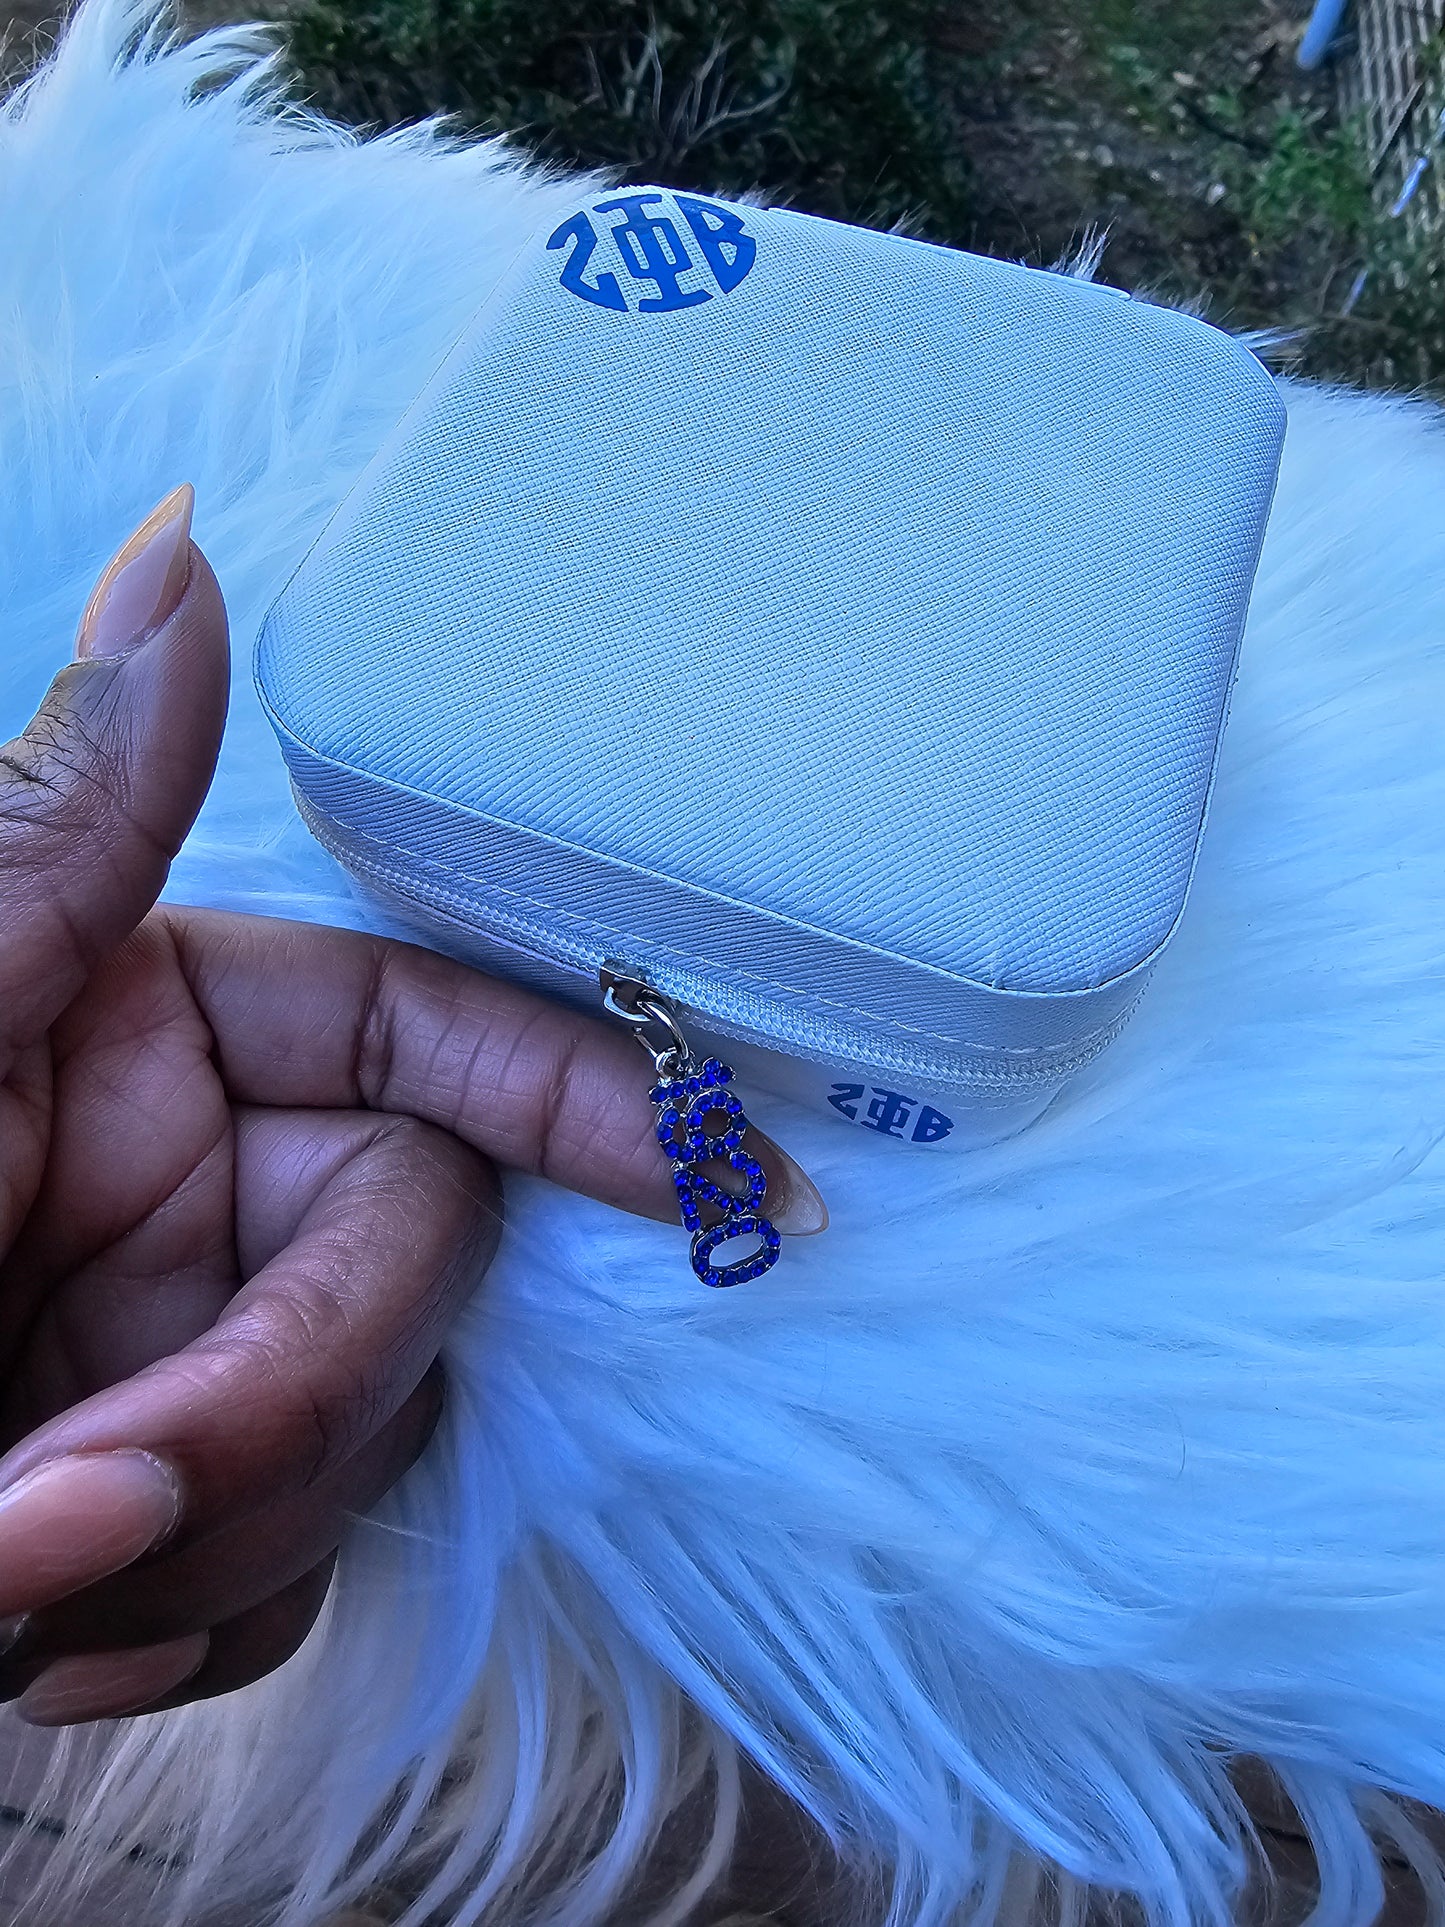 Zeta Phi Beta Jewelry Boxes Great For Traveling